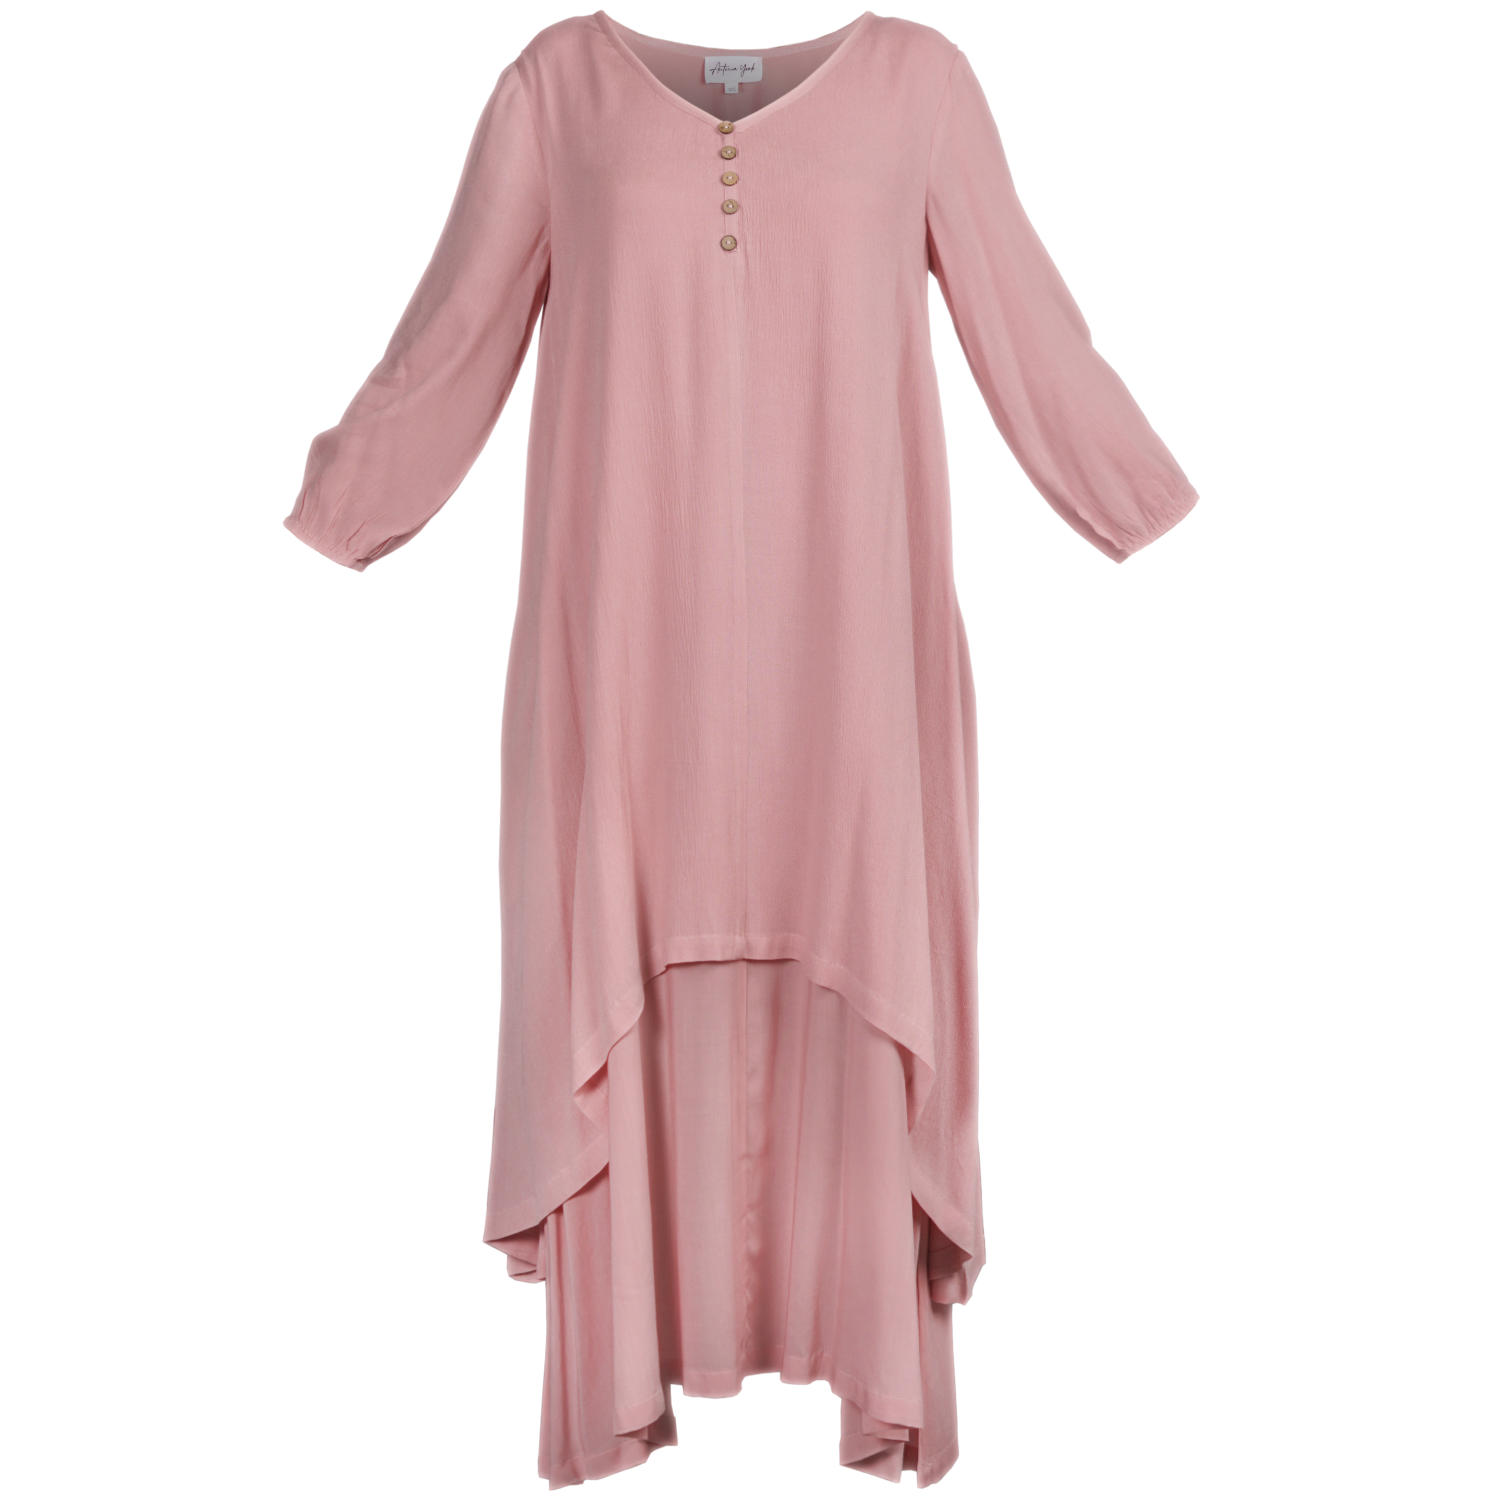 Women’s Pink / Purple Dusky Pink Layered Dress Chelsea Loose Fitting Dress With Front Button Detail One Size One Size Antonia York